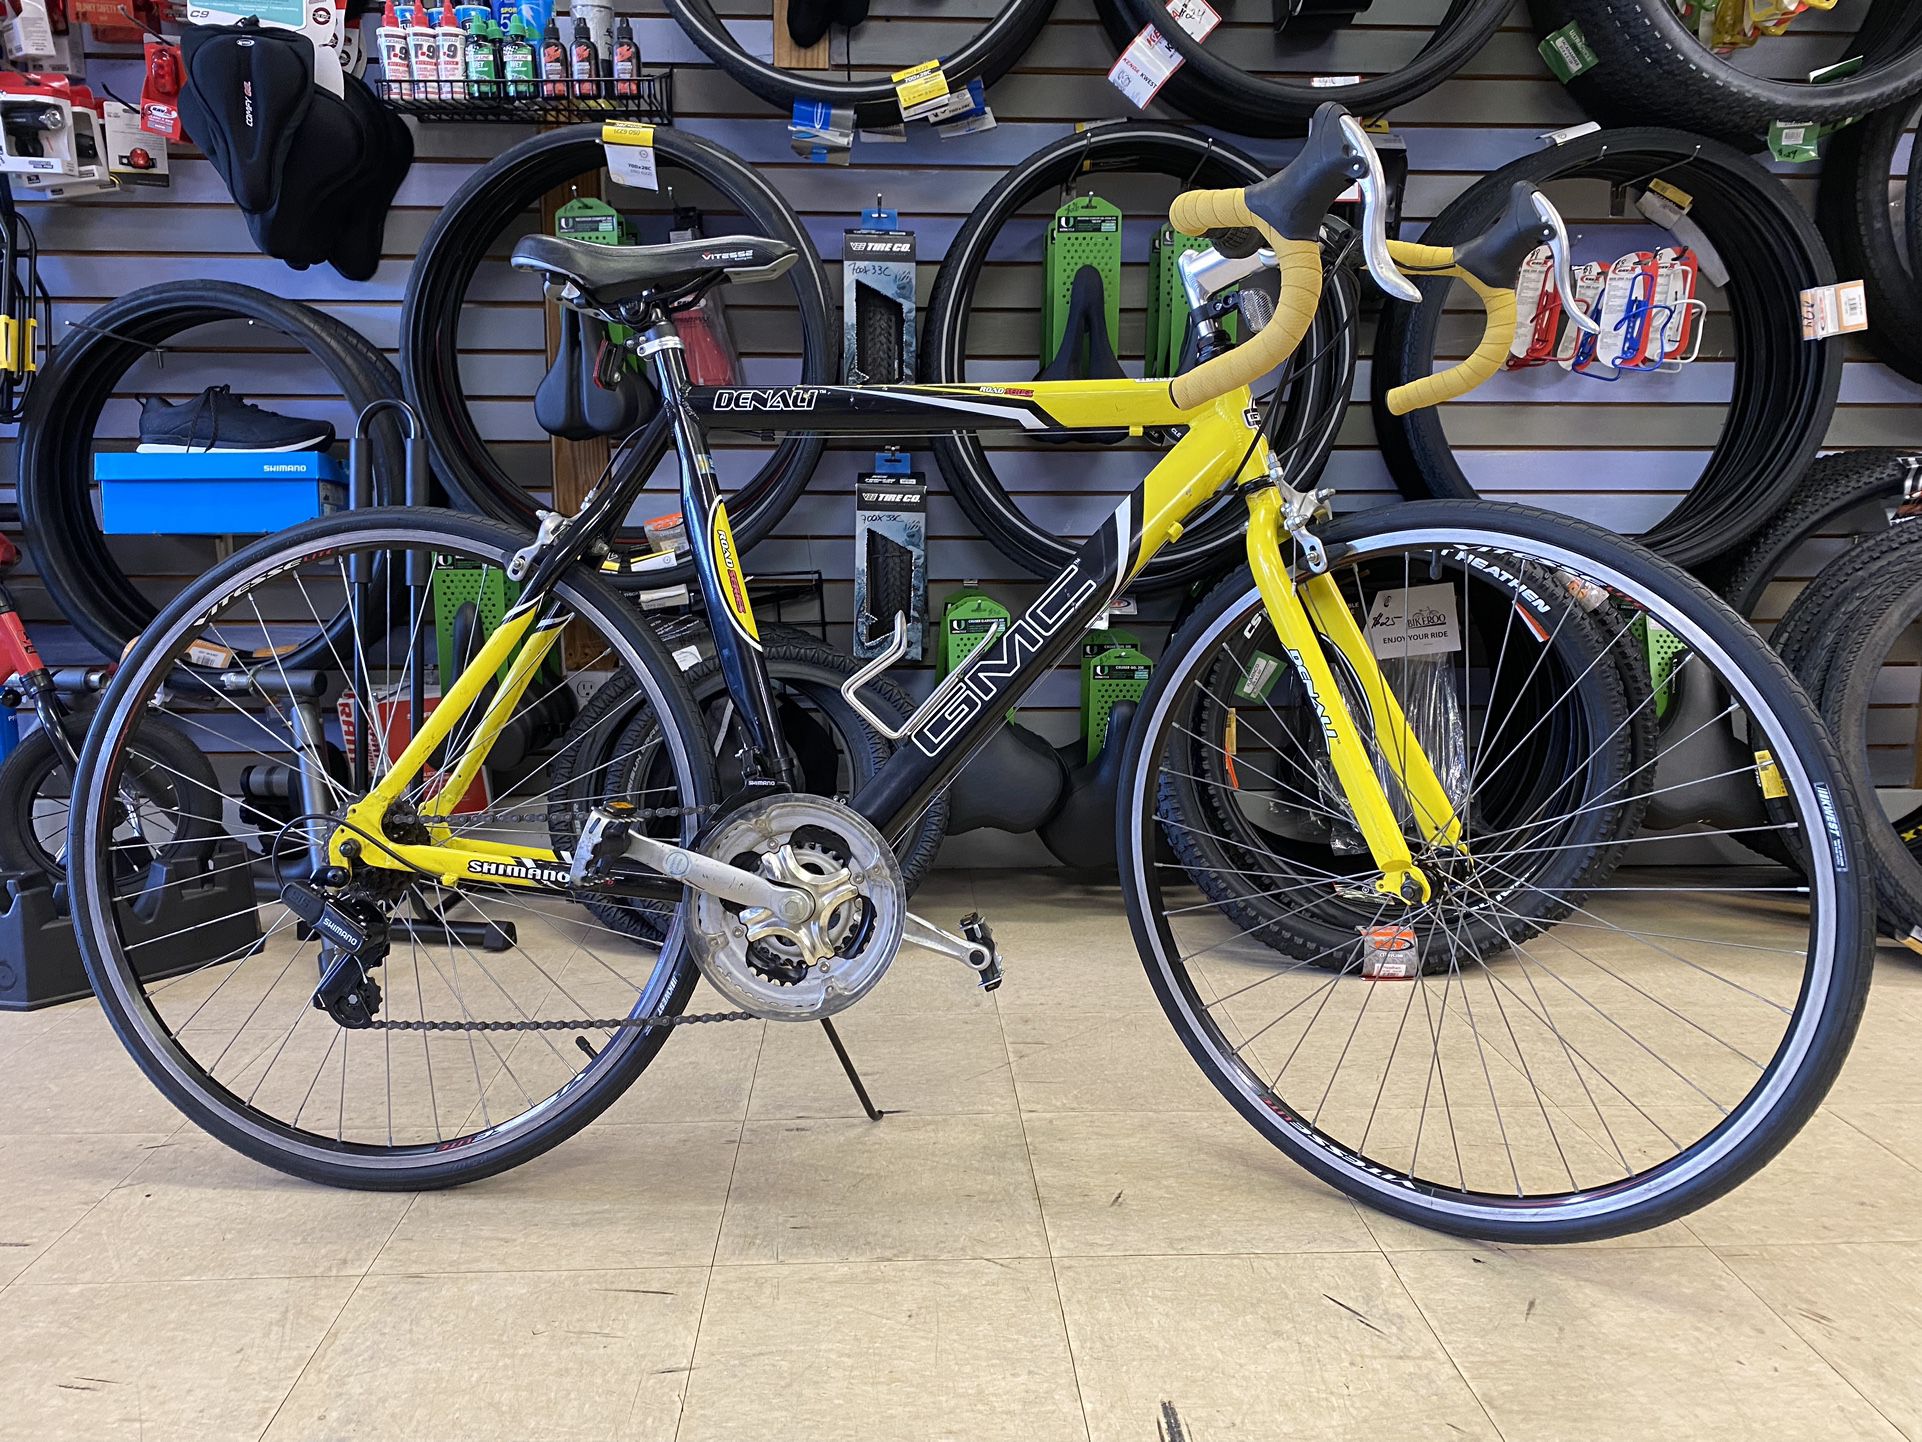 Road Bike GMC Denali, Aluminum Frame Size 23”, 21 Speeds Shimano, New Tires 700X25C, Free Delivery 